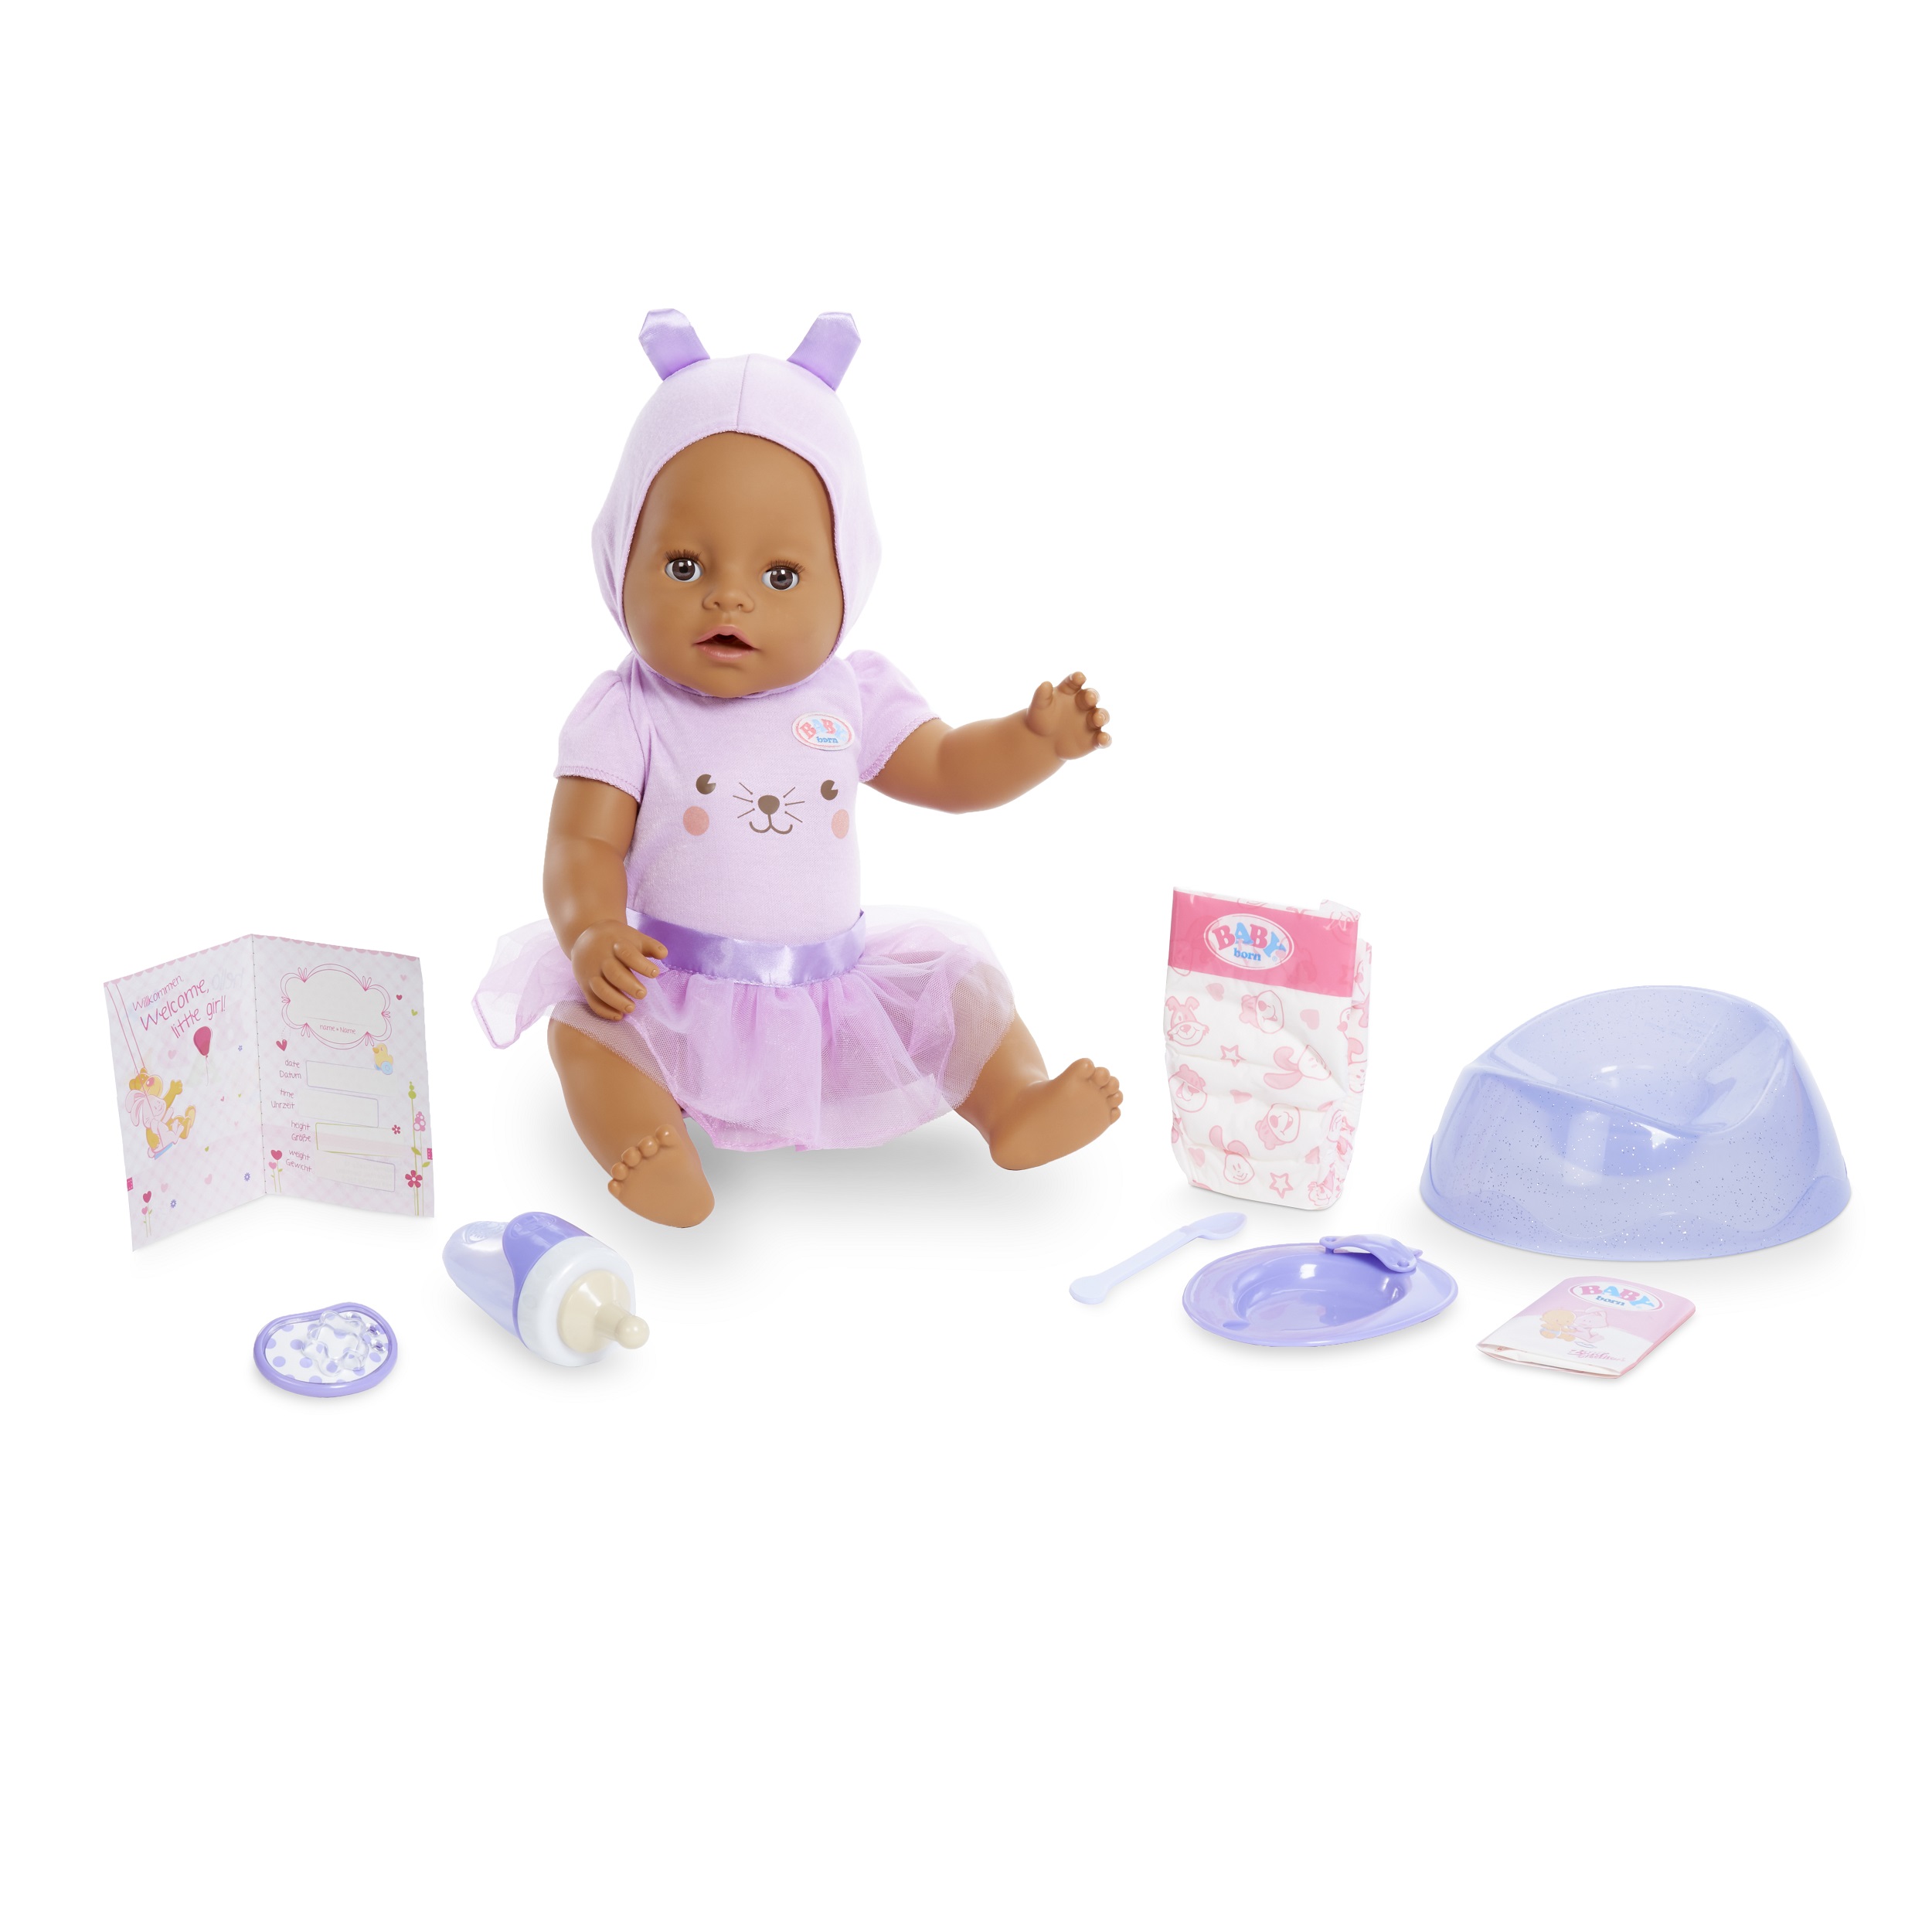 Baby born Interactive Doll Brown Eyes with 9 Ways to Nurture, Eats, Drinks, Cries, Sleeps, Bathes, and Wets - image 1 of 6